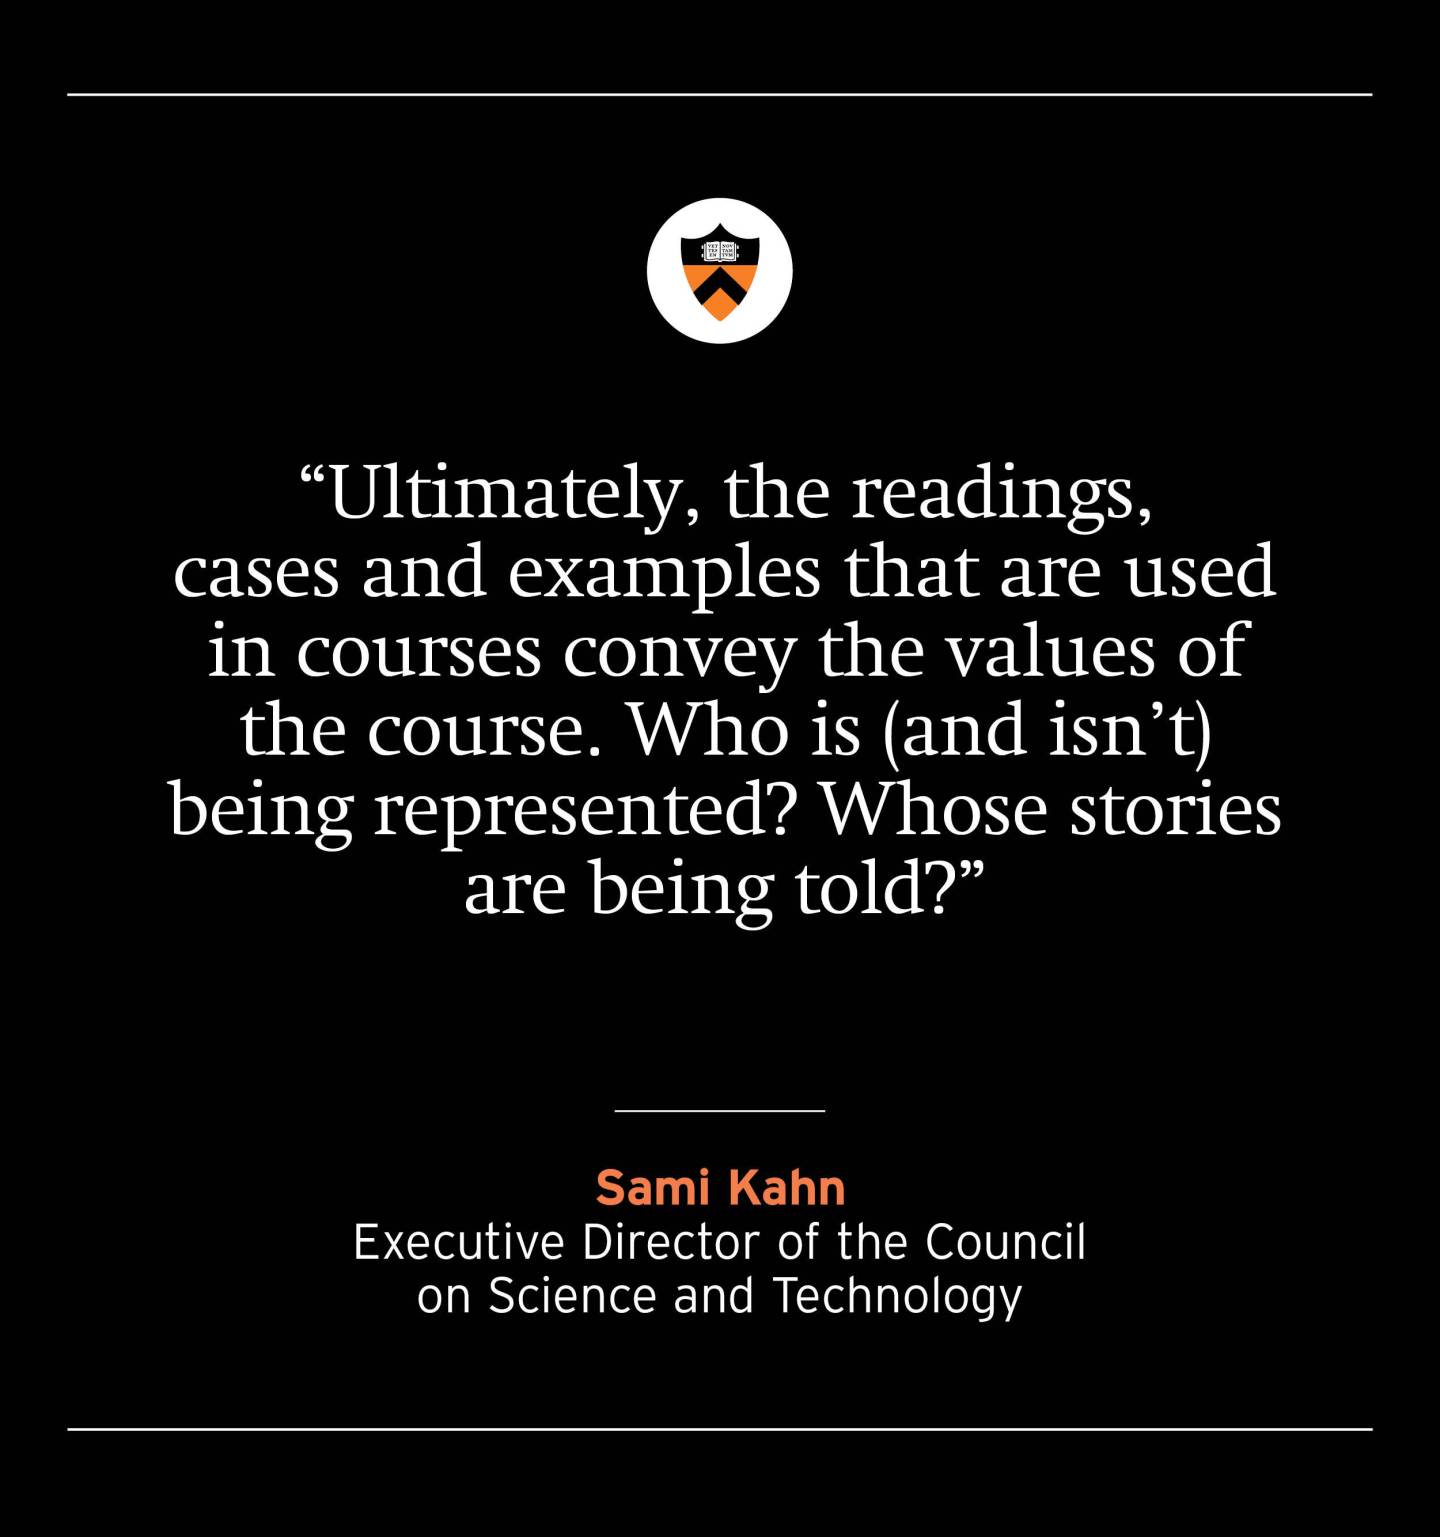 “Ultimately, the readings, cases and examples that are used in courses convey the values of the course. Who is (and isn’t) being represented? Whose stories are being told?” — Sami Kahn, Executive Director of the Council on Science and Technology